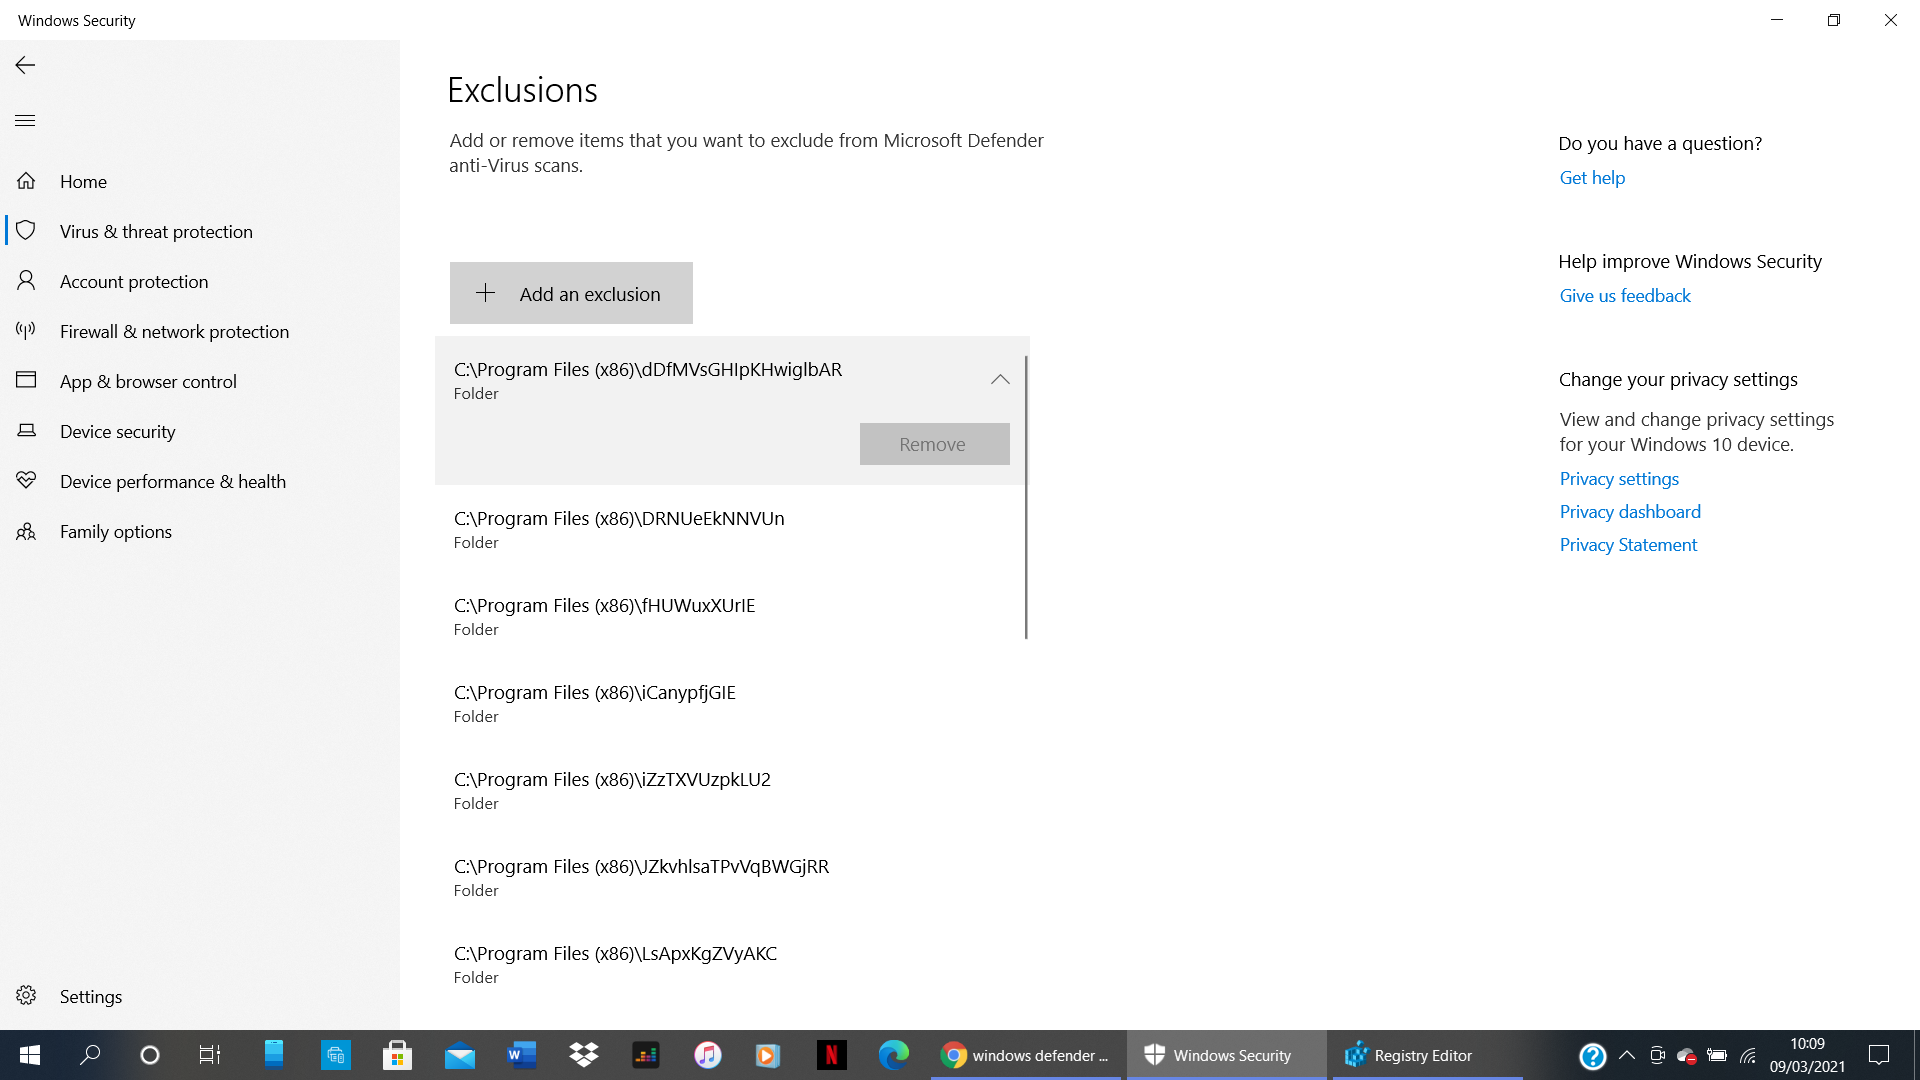 Windows Defender showing a list of greyed out Exclusions, but they don't show in the list... fee3b05b-a81d-49fb-afe7-50c255826818?upload=true.png